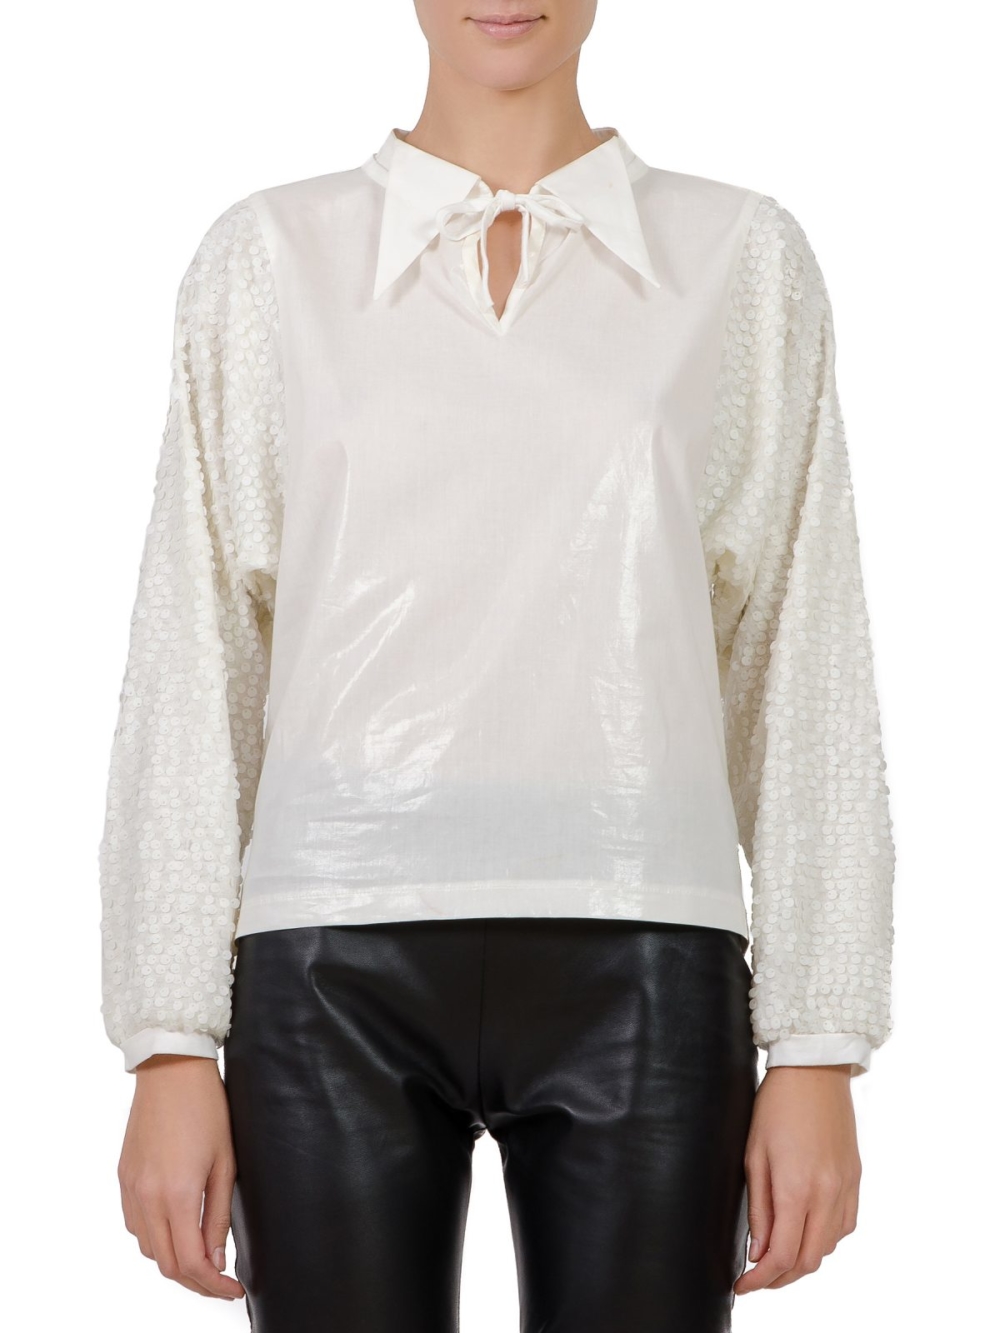 White shirt with sequins sleeves (2)